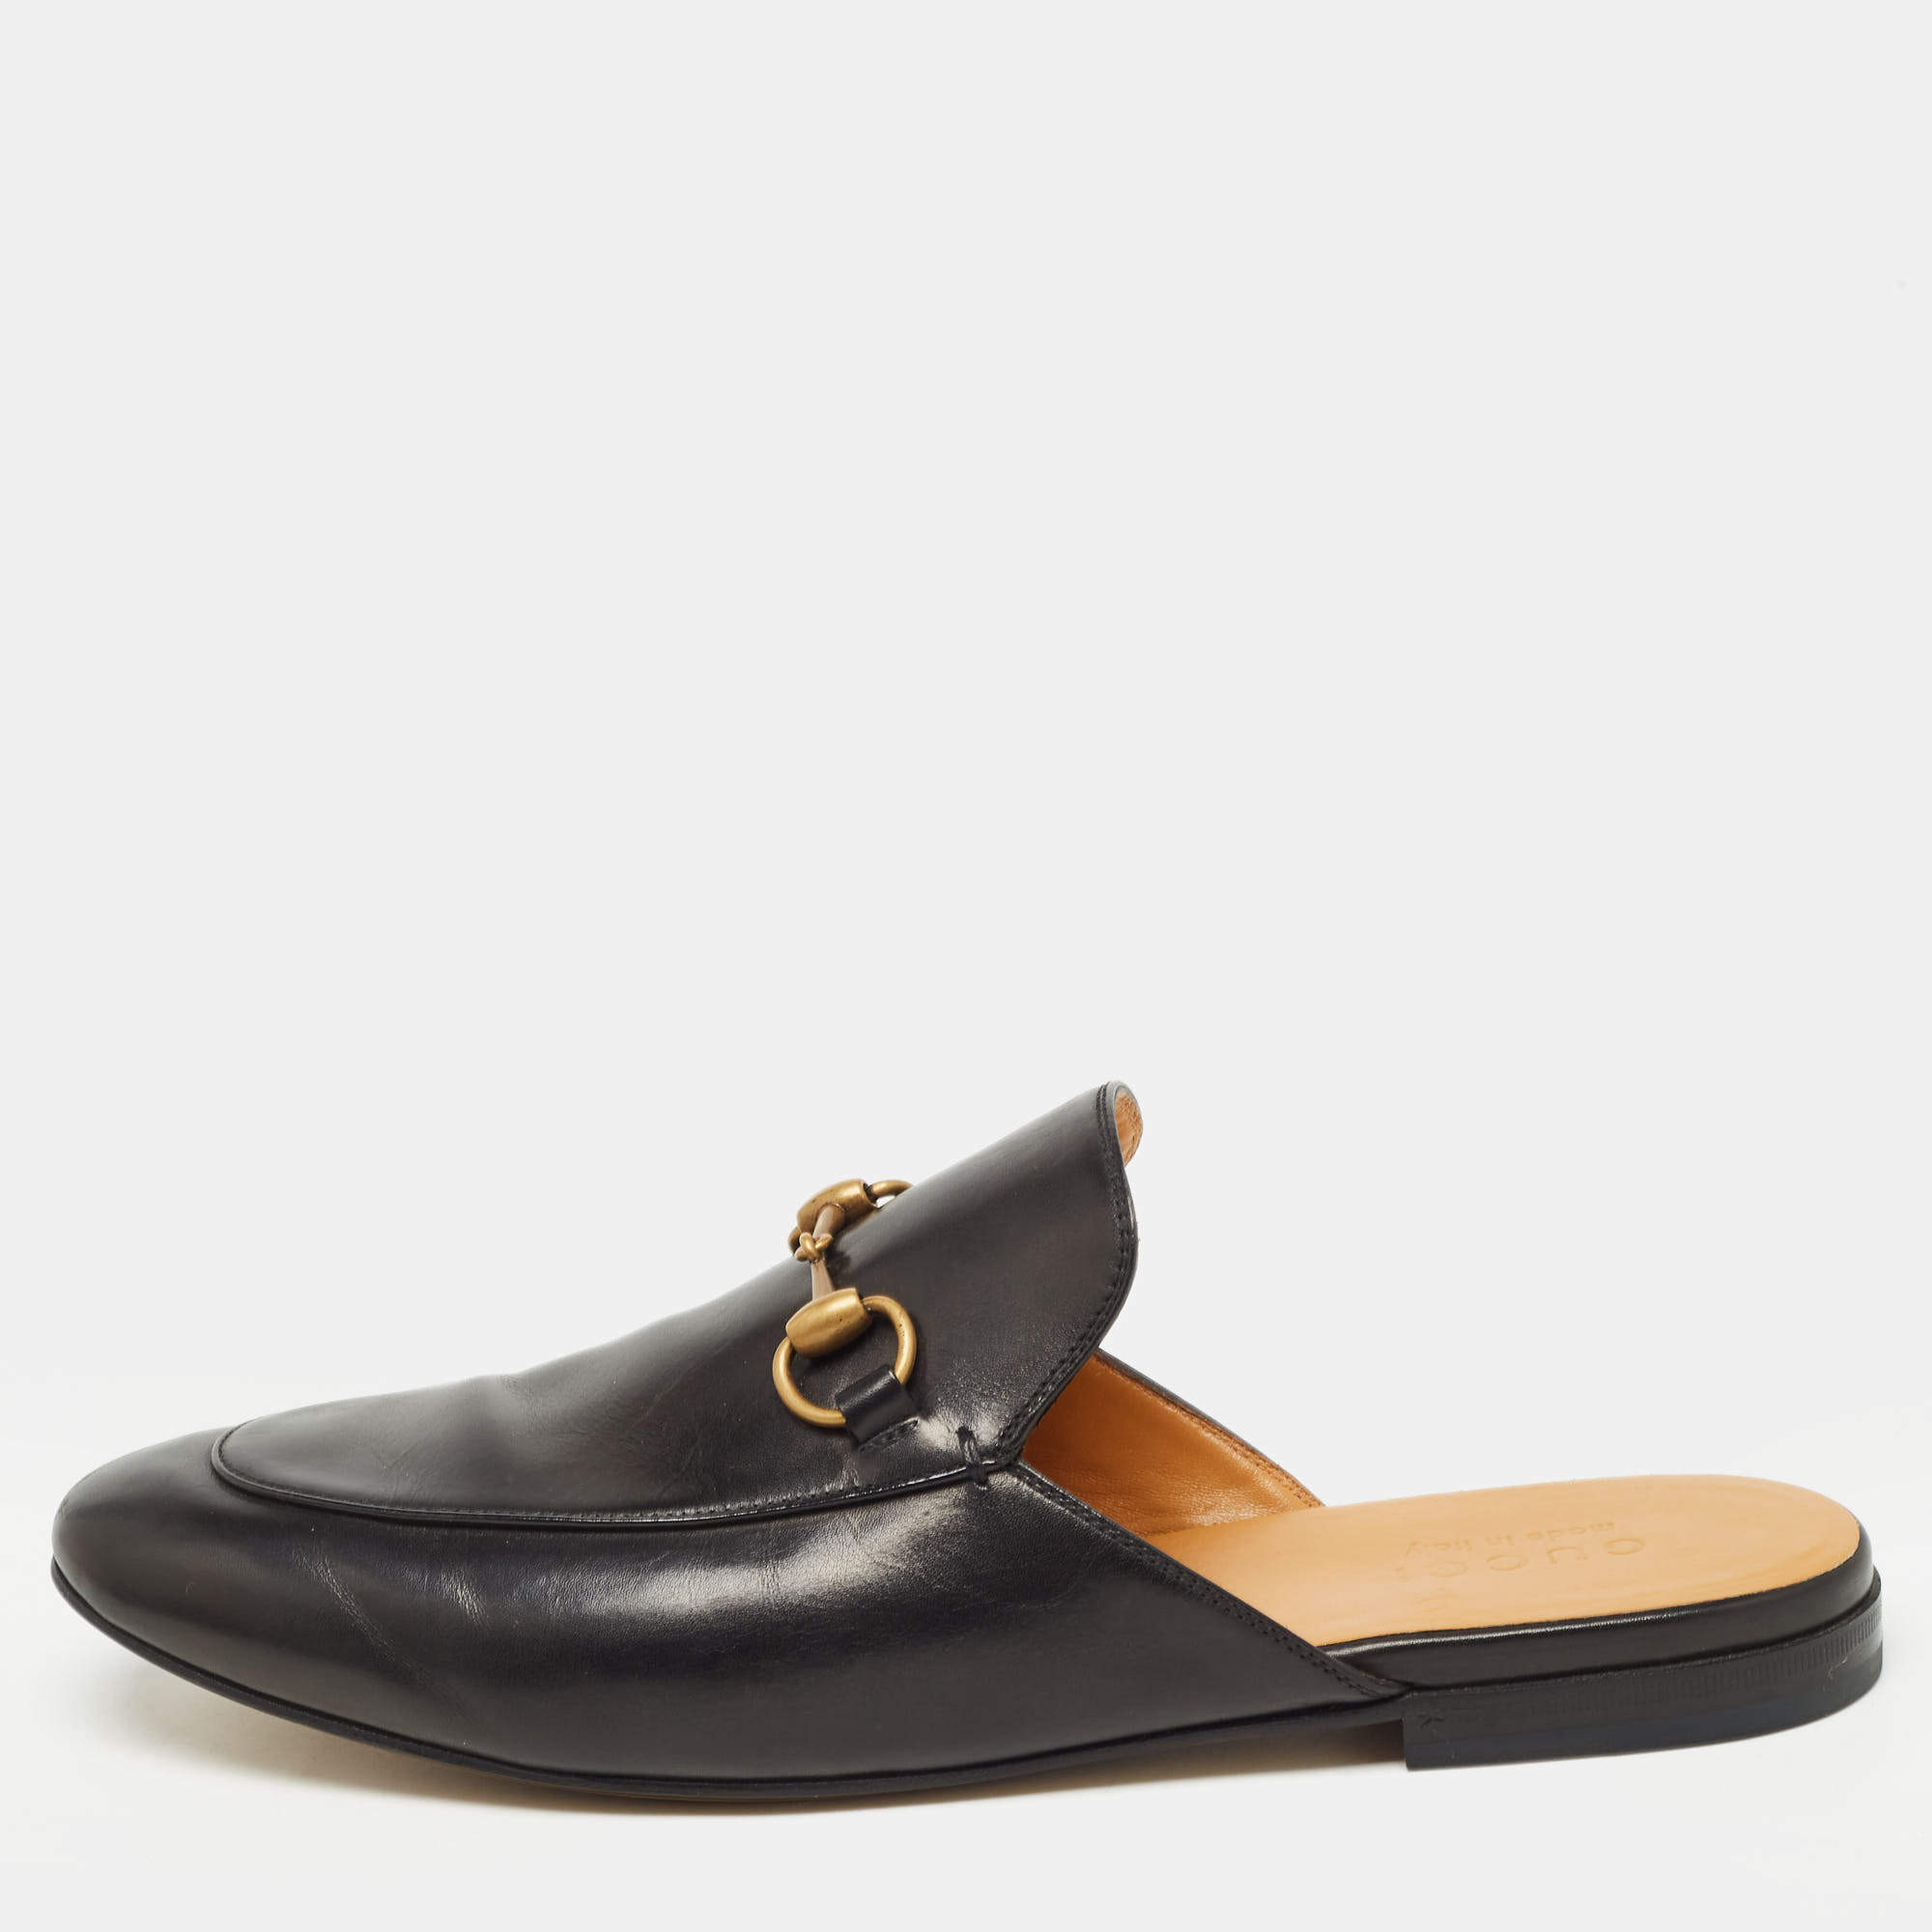 Gucci Black Leather Princetown Mules Size 43.5